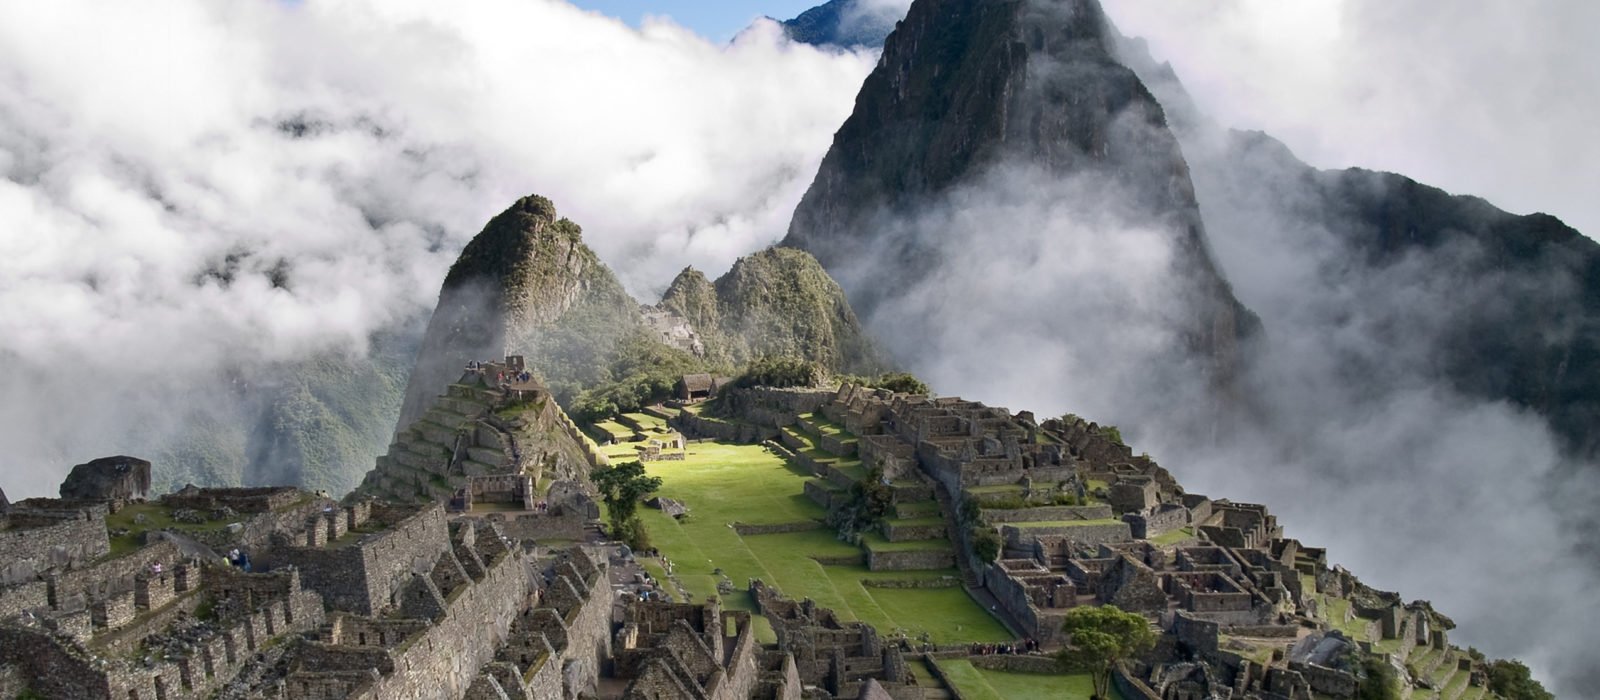 Panoramic view of Machu Picchu emerging through the clouds on a sunny day